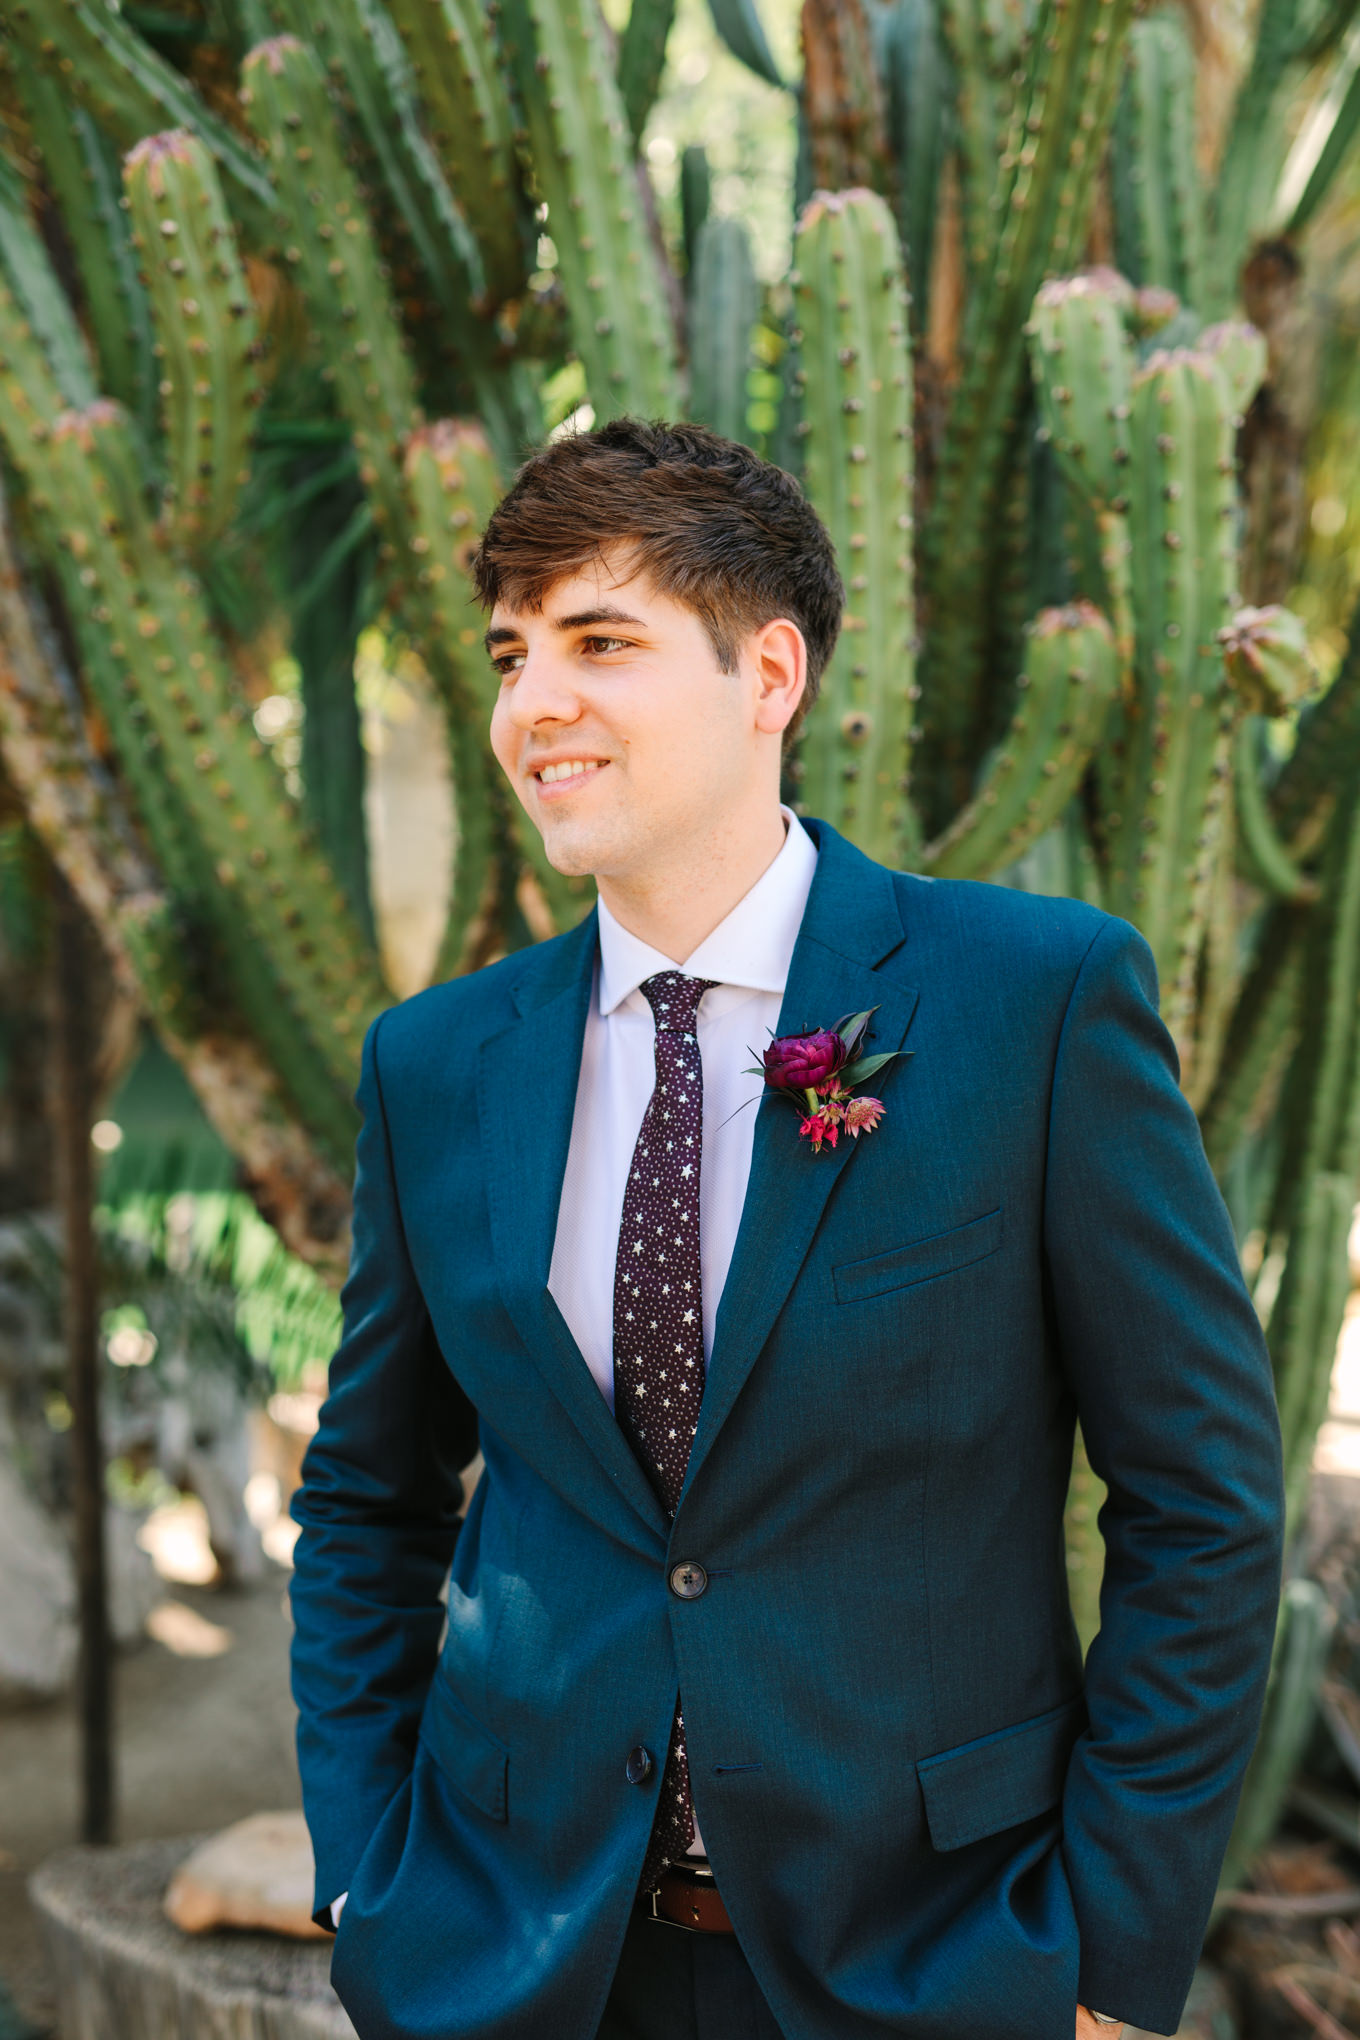 Groom in jewel tone emerald suit with celestial burgundy tie | Colorful jewel tone Palm Springs elopement | Fresh and colorful photography for fun-loving couples in Southern California | #colorfulelopement #palmspringselopement #elopementphotography #palmspringswedding Source: Mary Costa Photography | Los Angeles